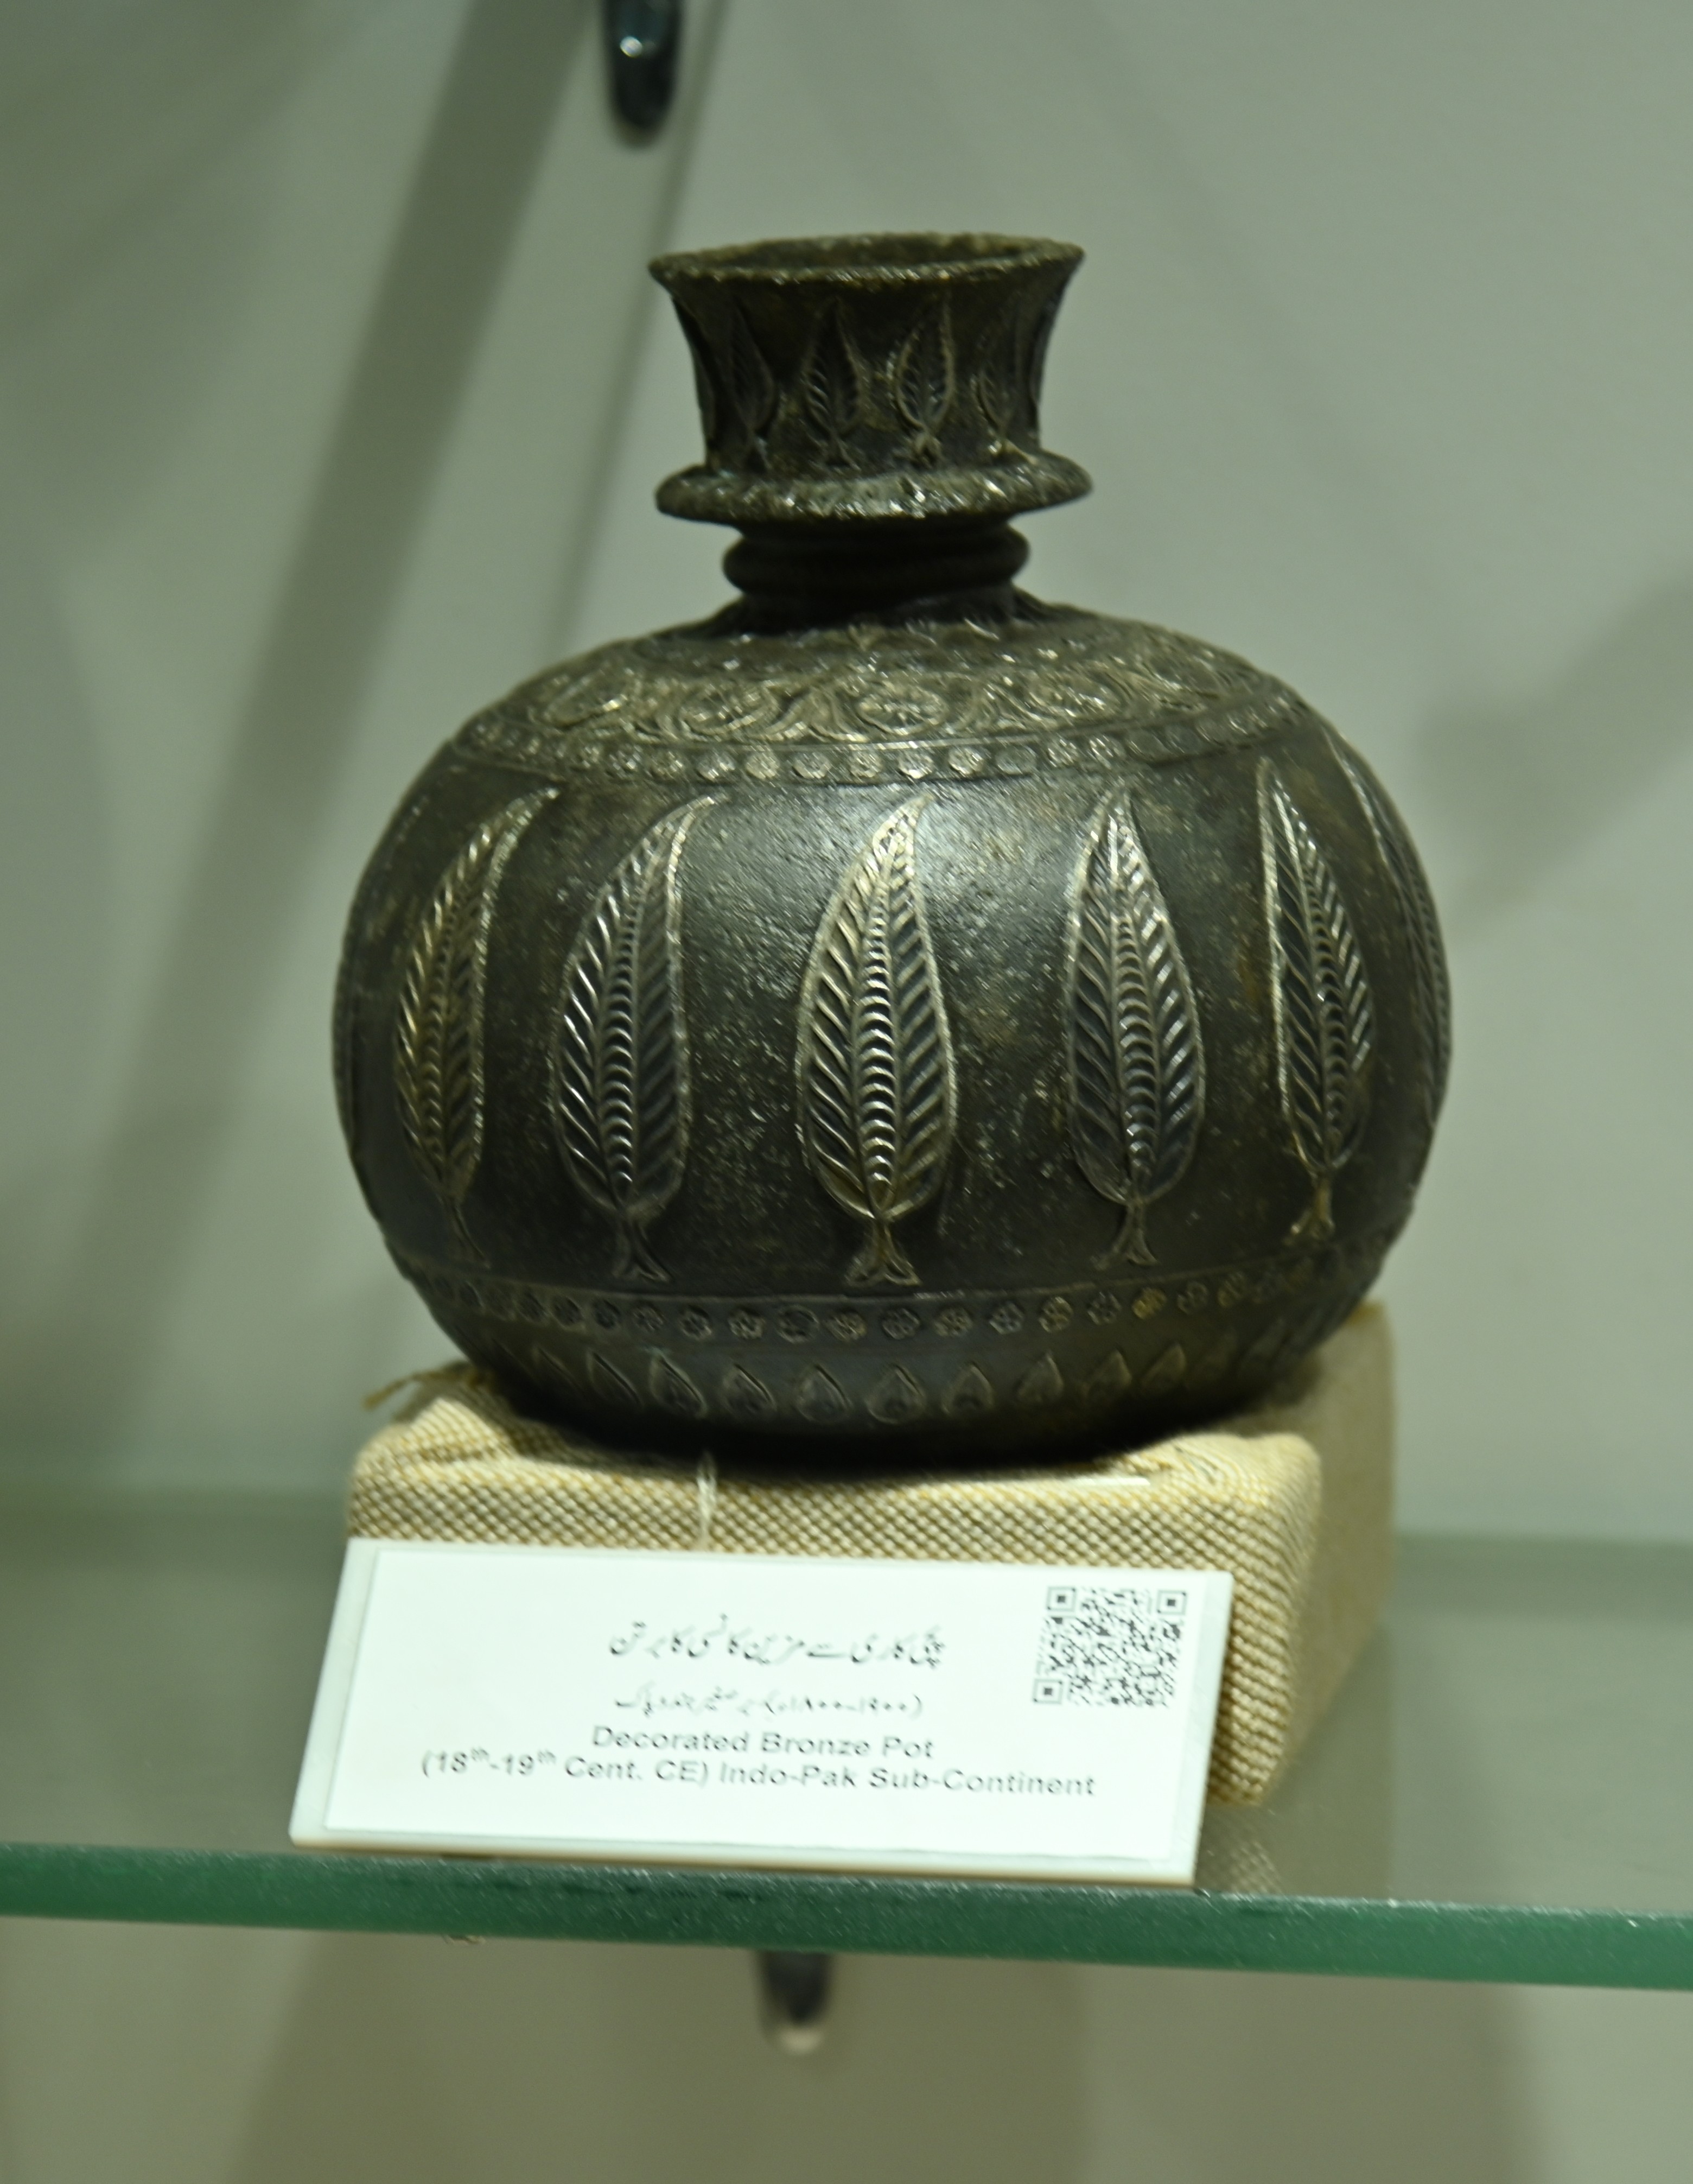 The decorated Bronze Pot of 18th-19th century